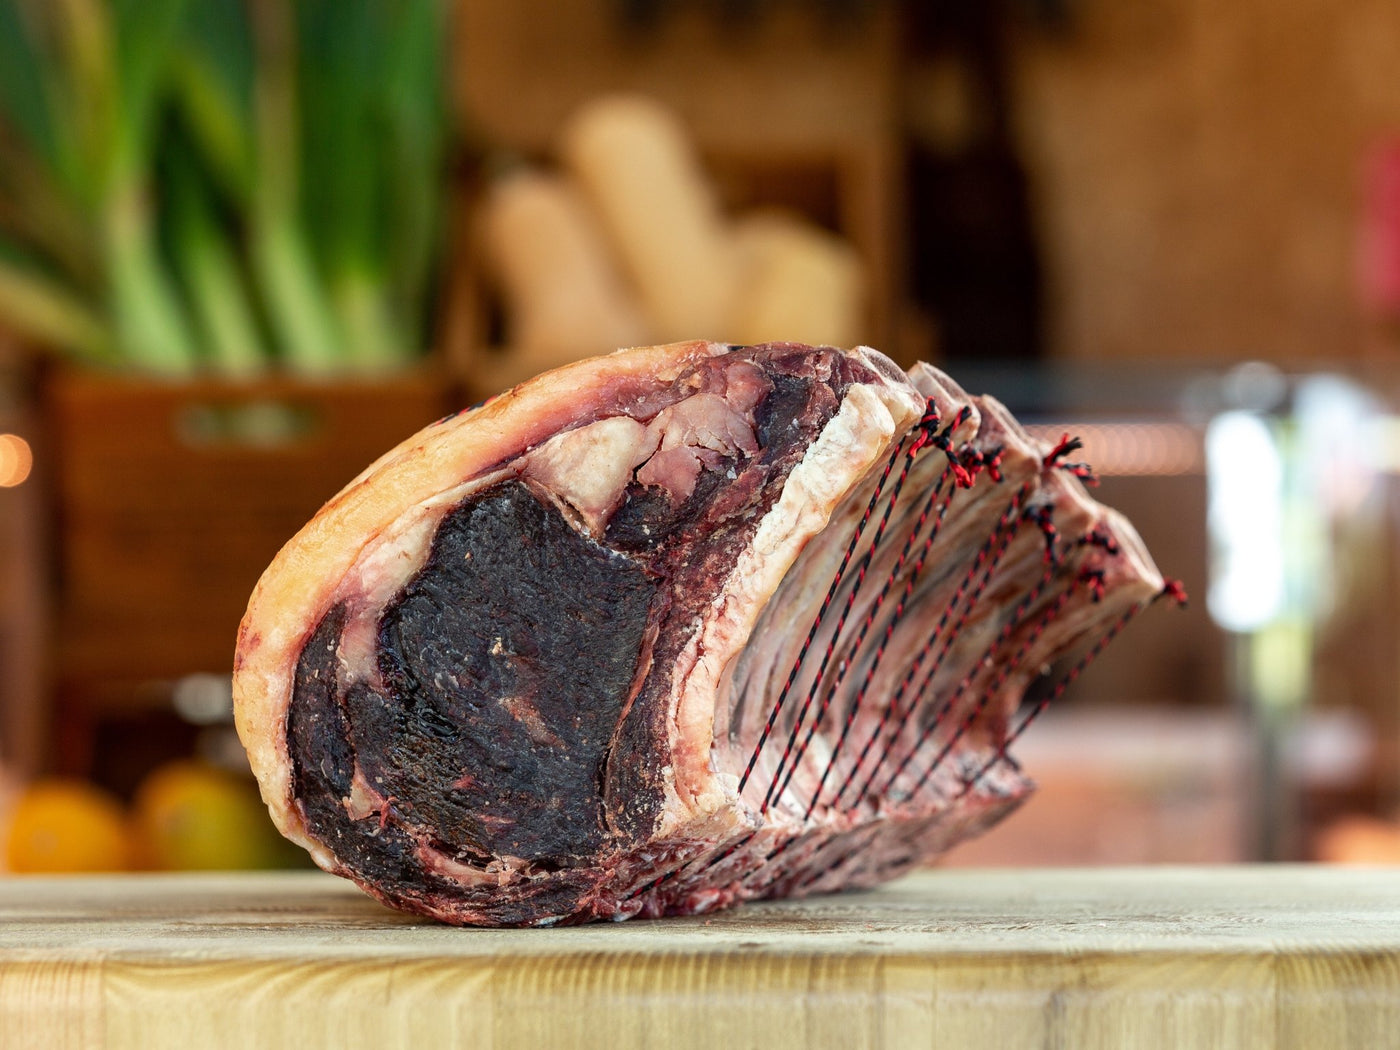 Grass Fed, Dry-Aged Rib Of Beef Box, With All The Trimmings - Thomas Joseph Butchery - Ethical Dry-Aged Meat The Best Steak UK Thomas Joseph Butchery